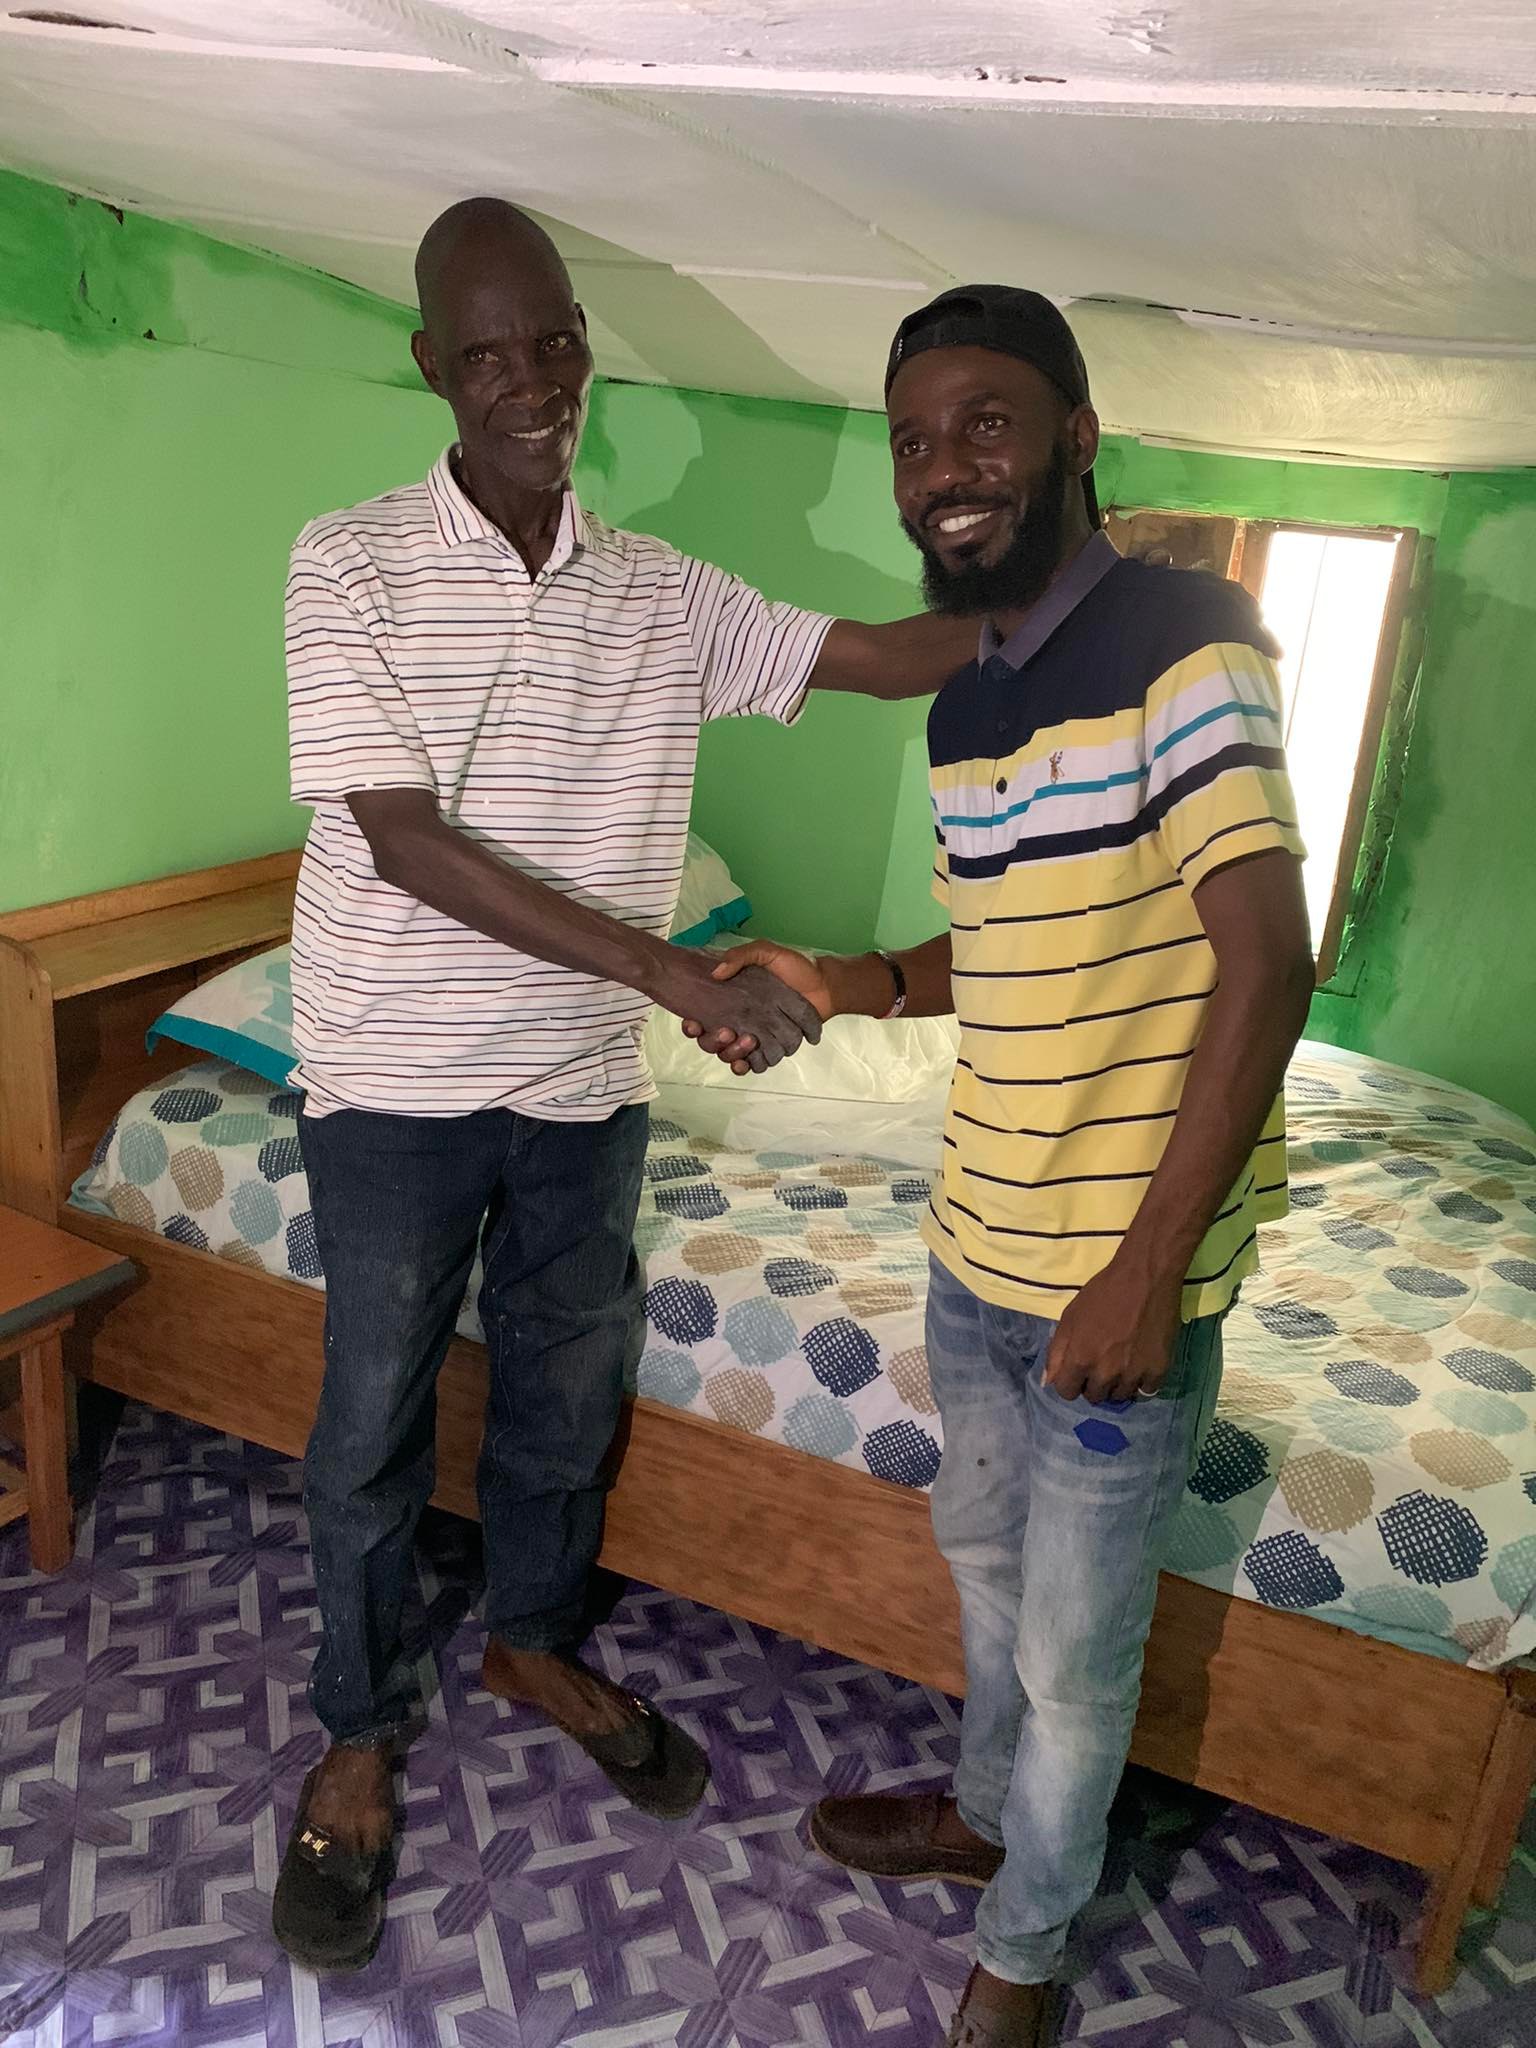 Daniel stands with Harry in his new room. Pa Harry is so very grateful for all Daniel has done for him.  
Thank you to the donor who has made all this possible! What a gift!